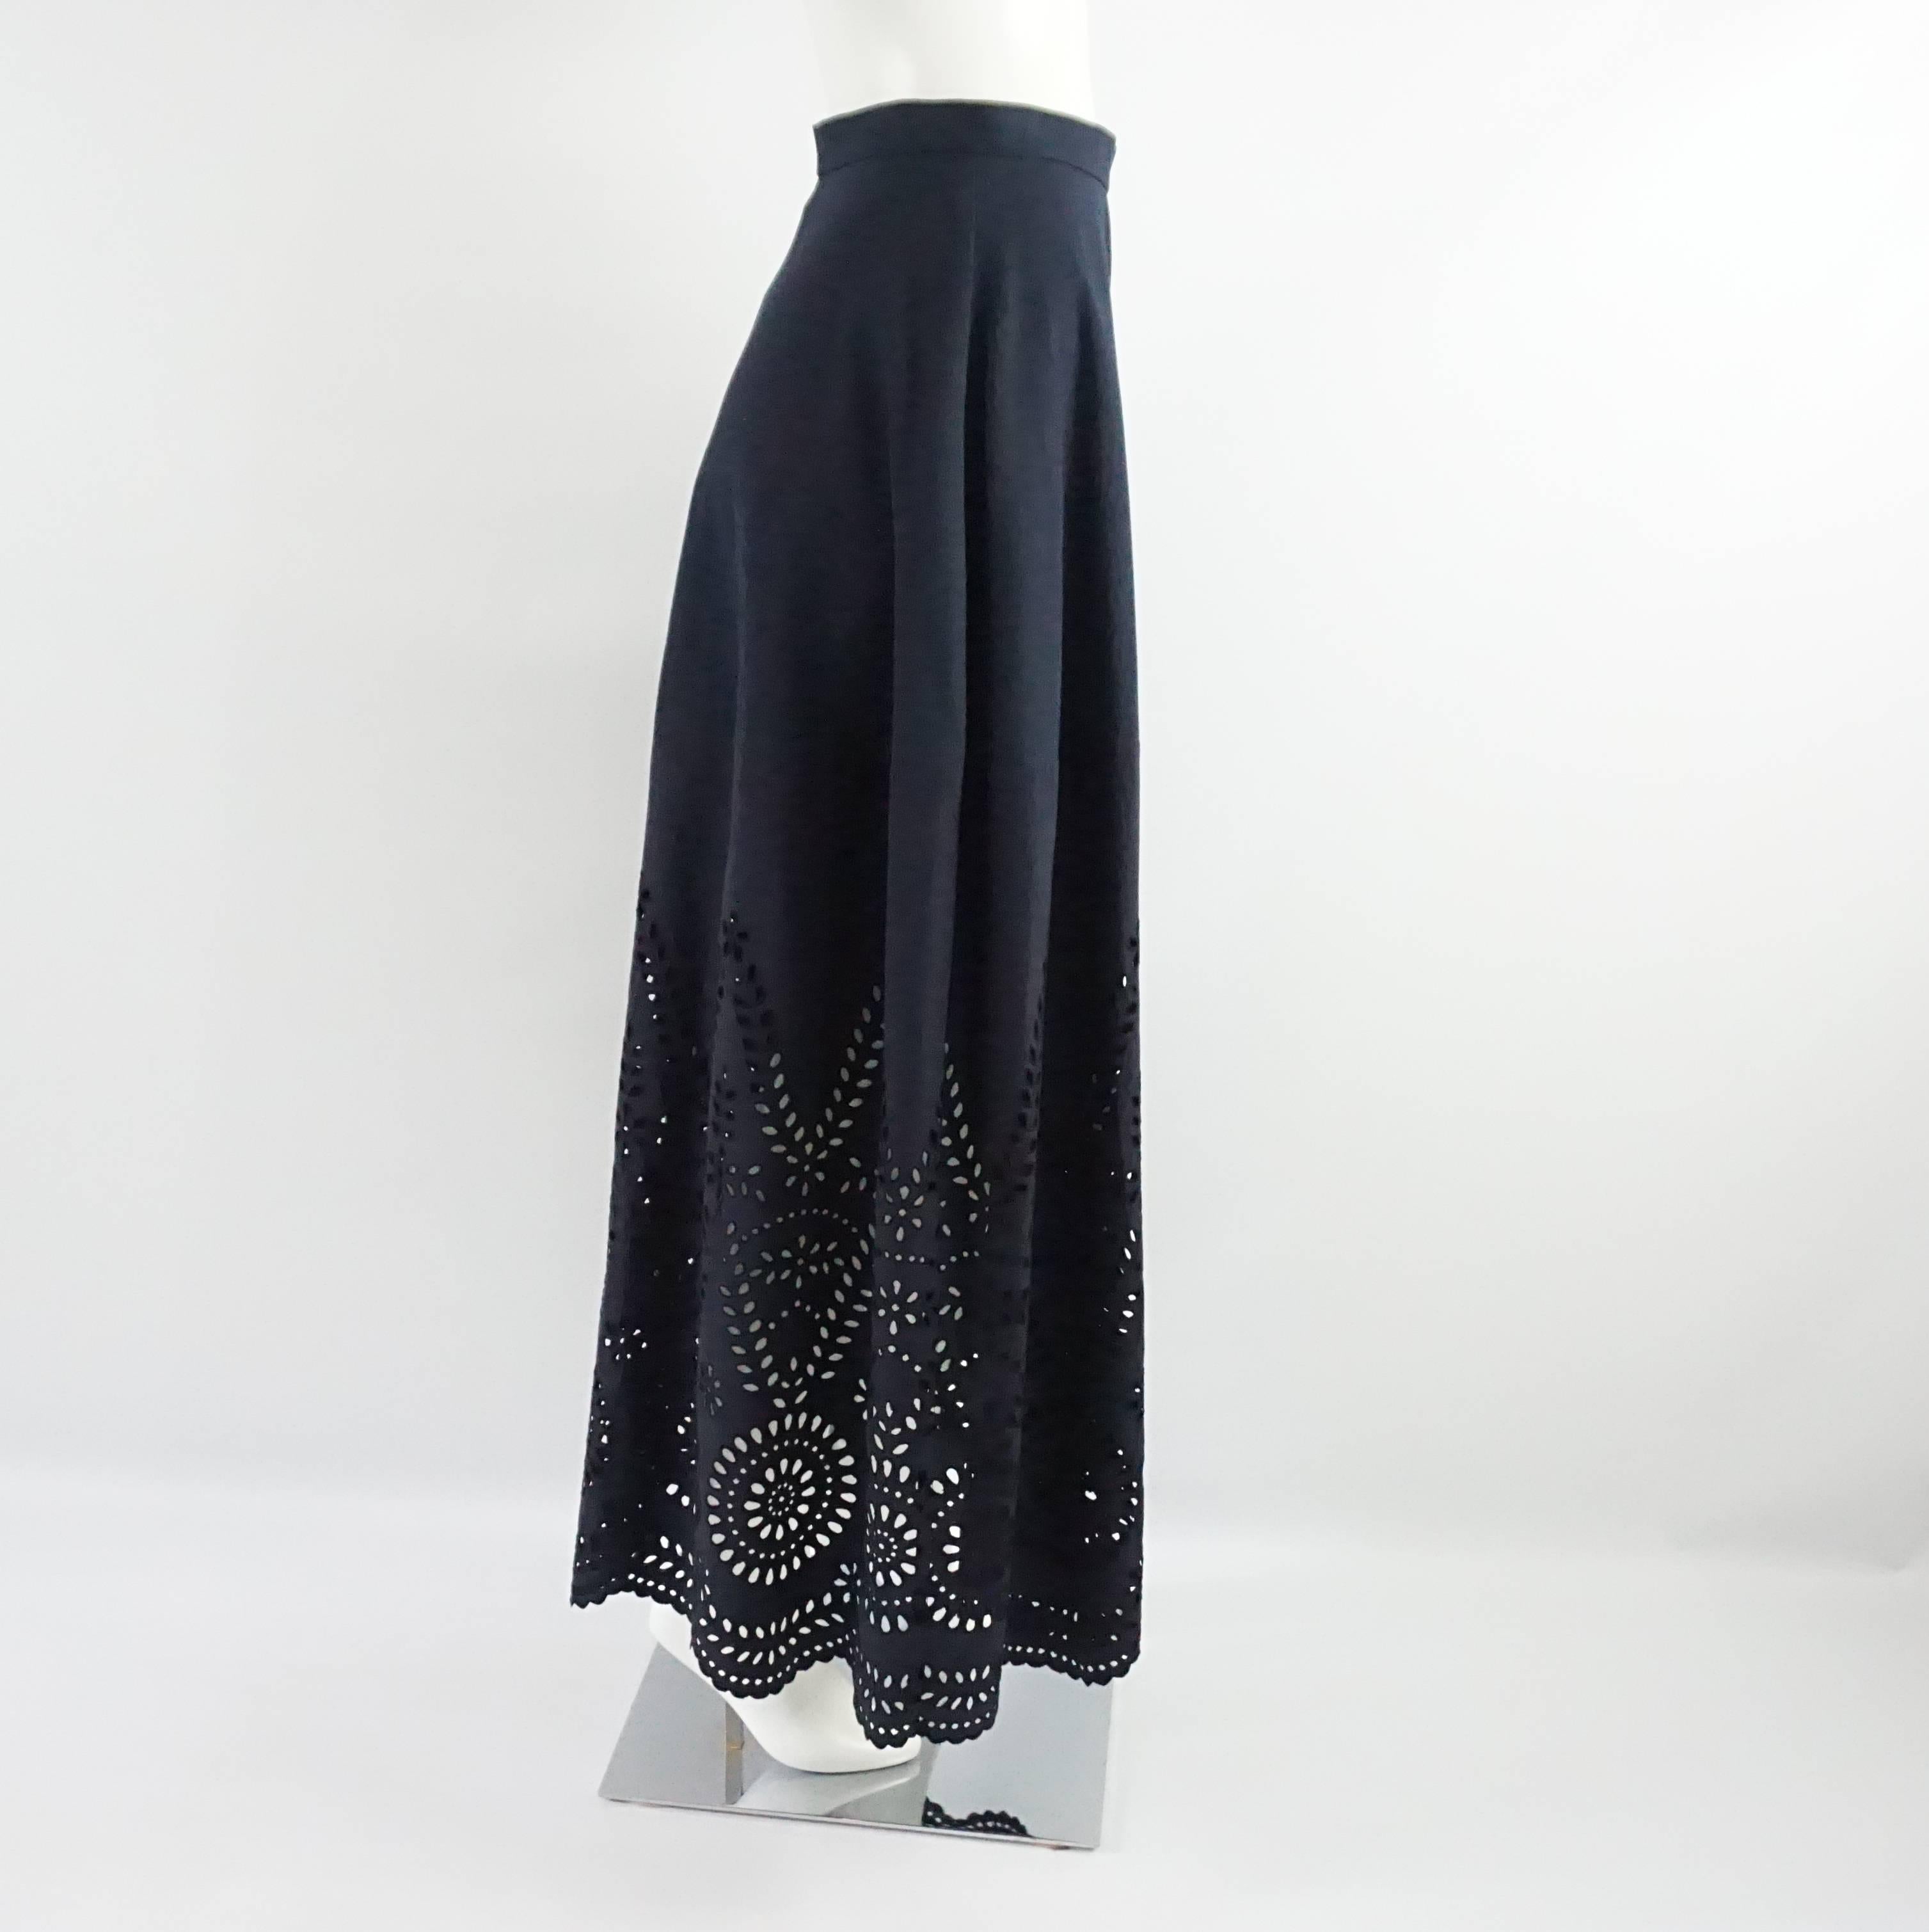 This Stella McCartney long navy cotton skirt features an eyelet design on the bottom. This skirt is in excellent condition.

Measurements
Waist: 27"
Length: 40.25"